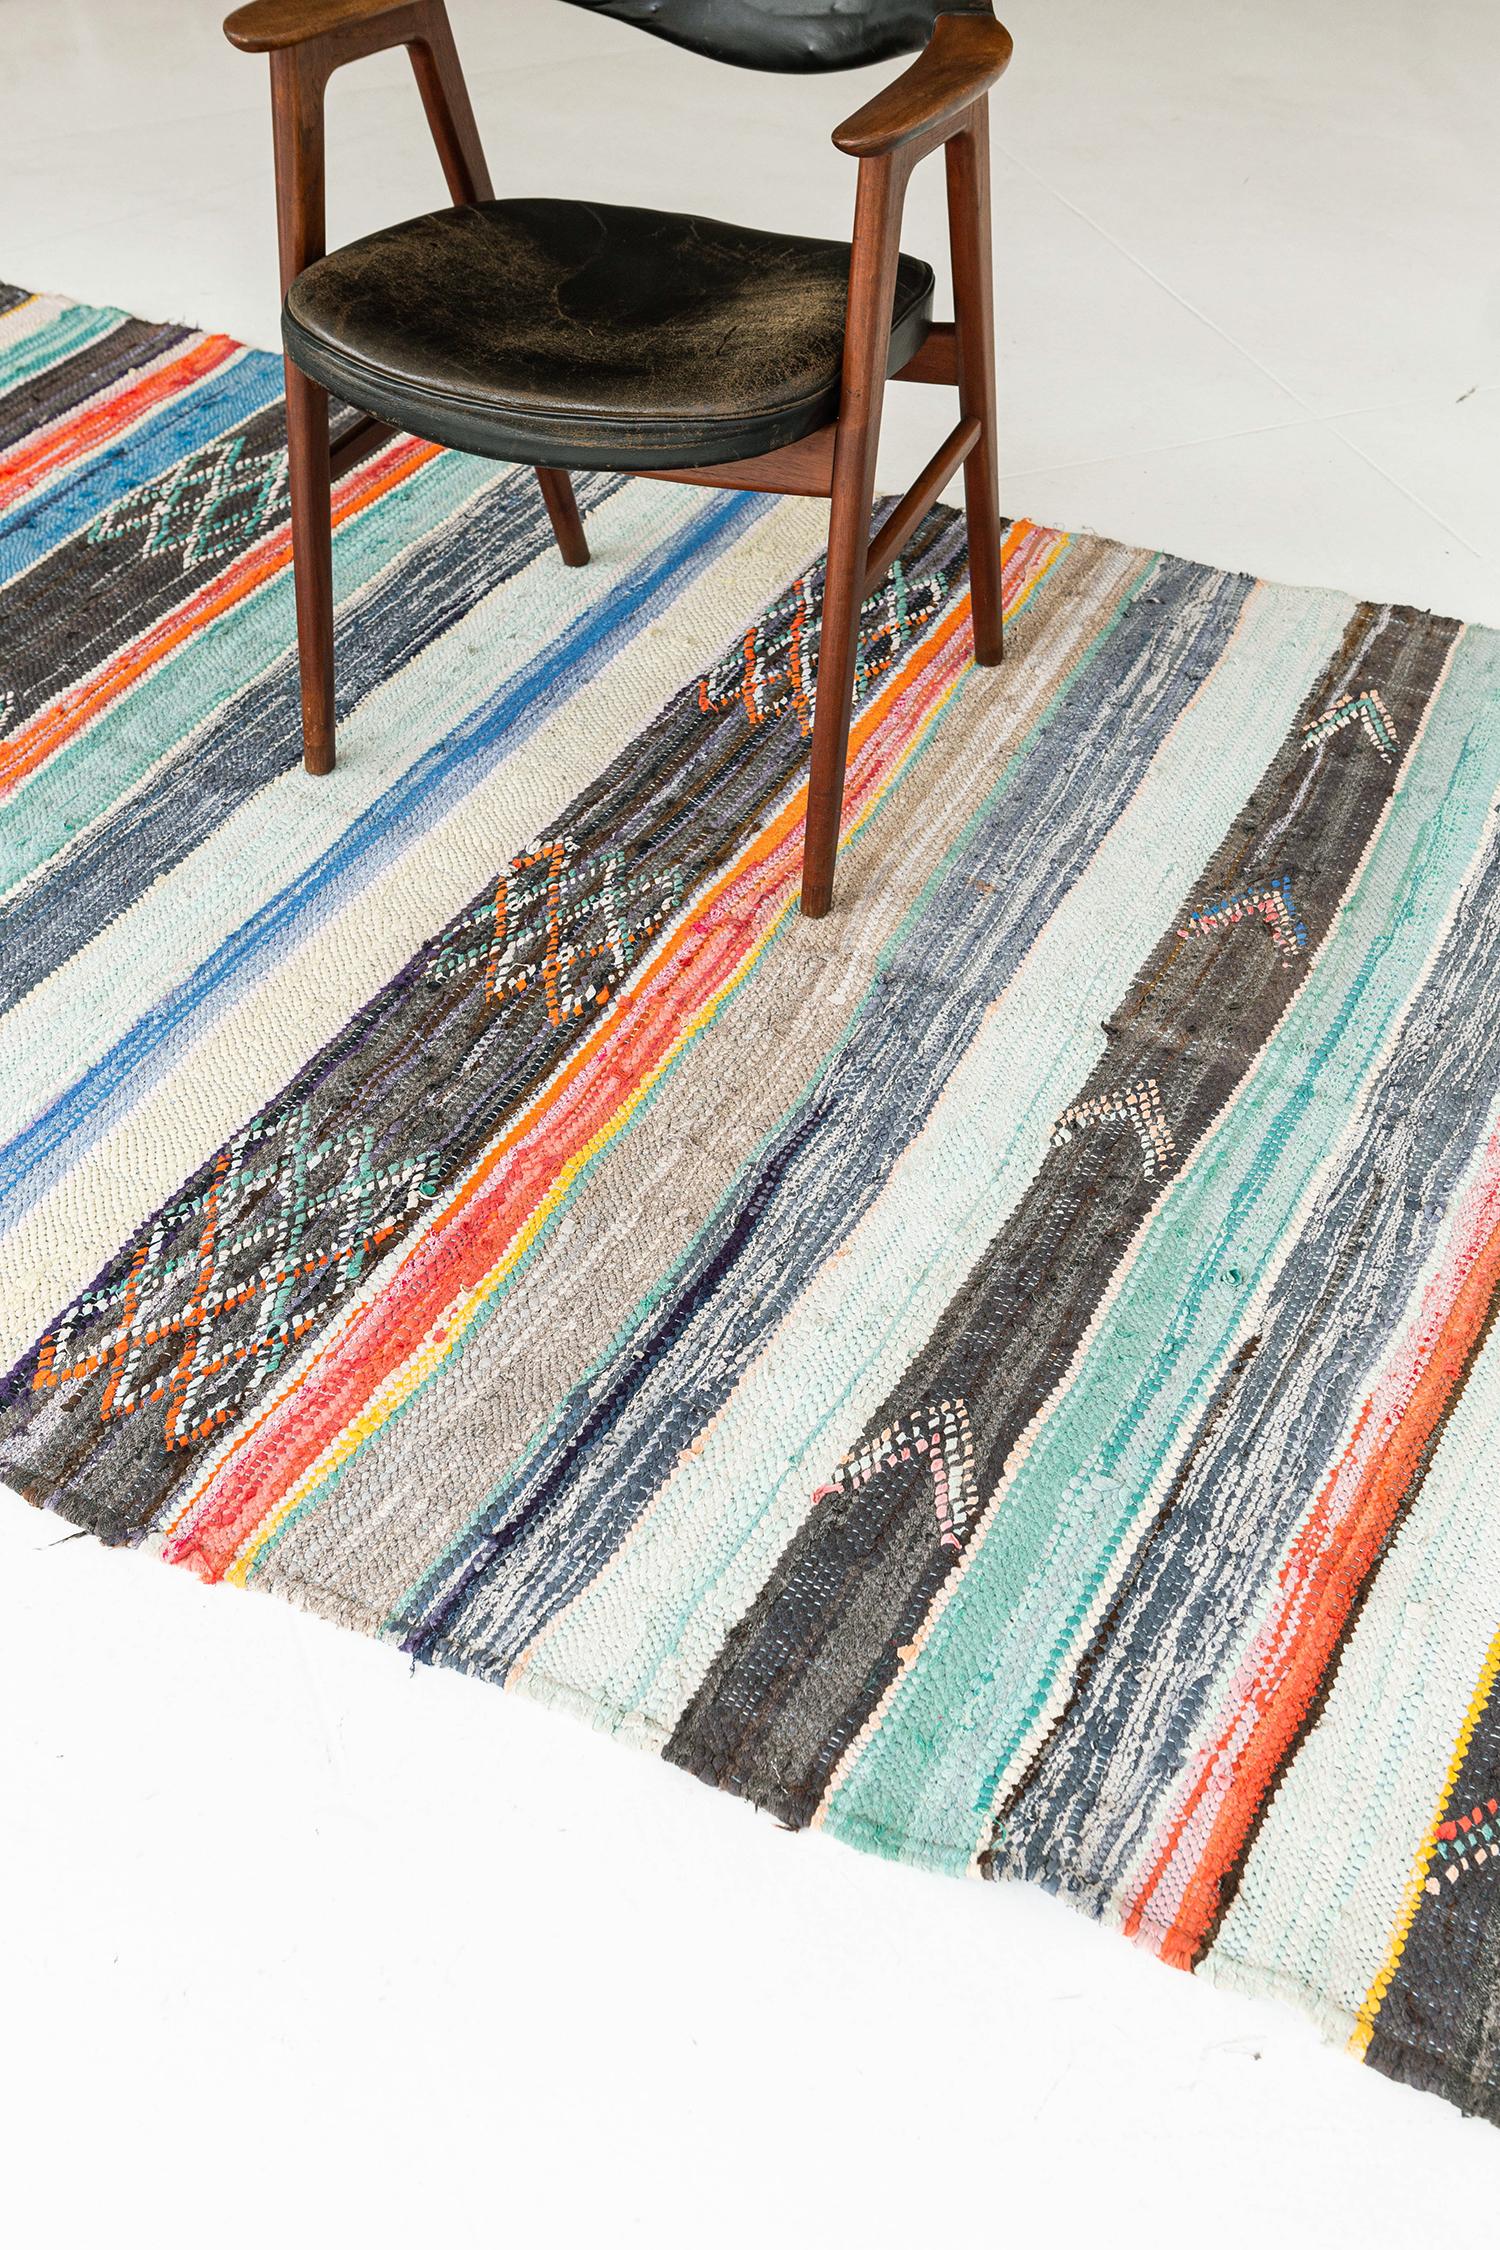 A creative vintage Moroccan rug Haouz tribe design from our Atlas collection that is knotted in shades of midcentury color scheme wool. It features a story of Haouz tribe with lozenges and chevrons. A centerpiece that is perfect with your living